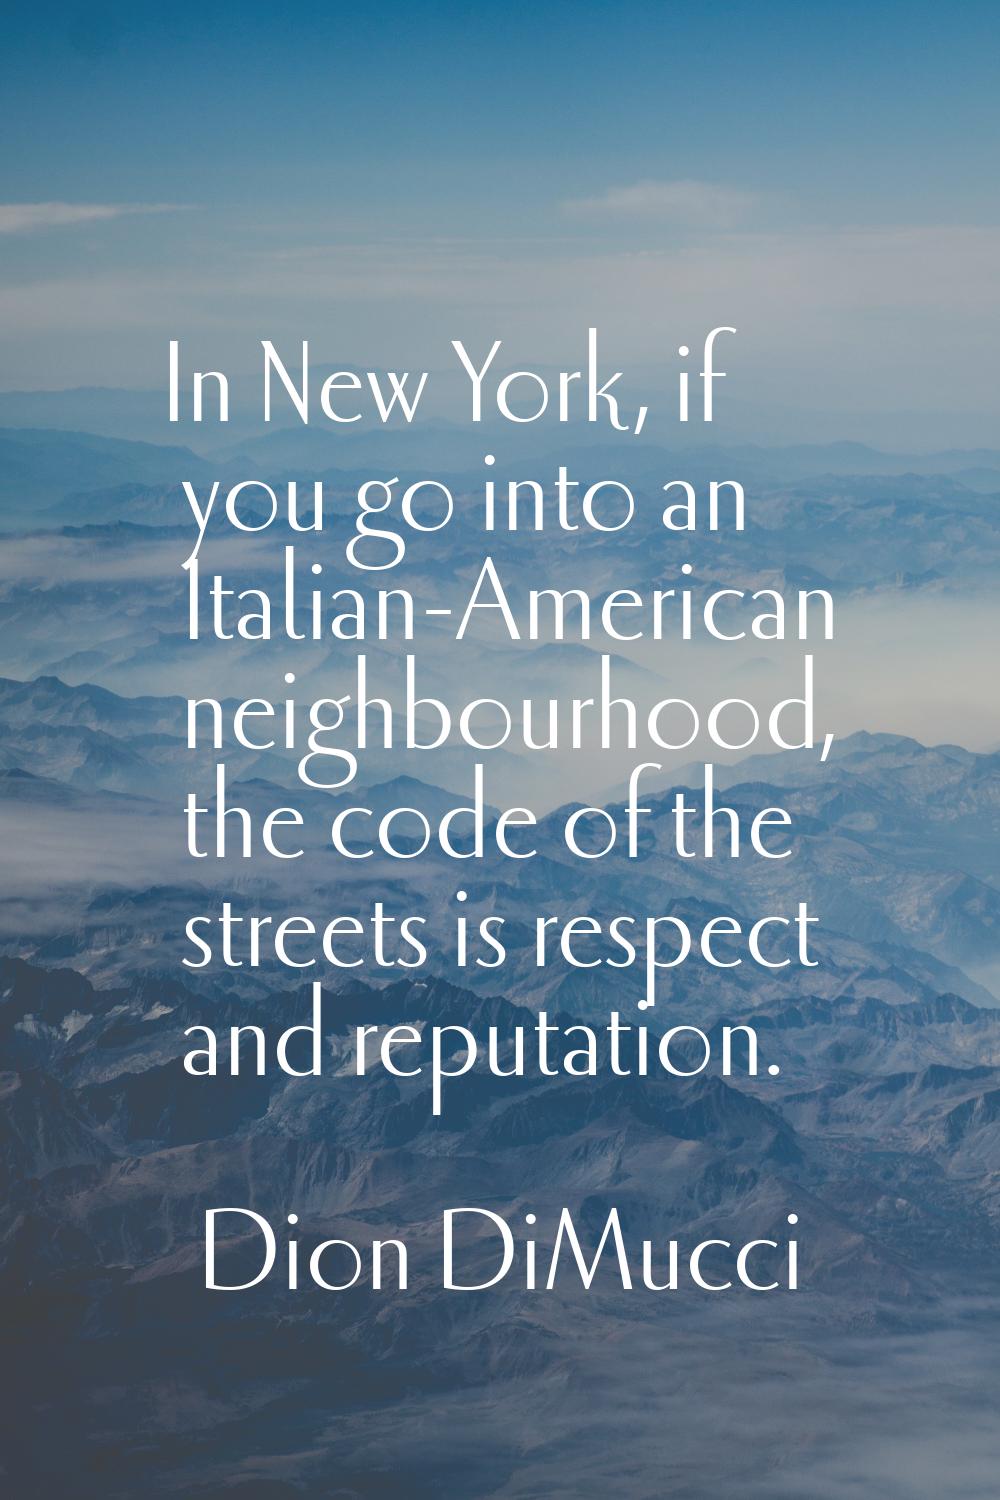 In New York, if you go into an Italian-American neighbourhood, the code of the streets is respect a